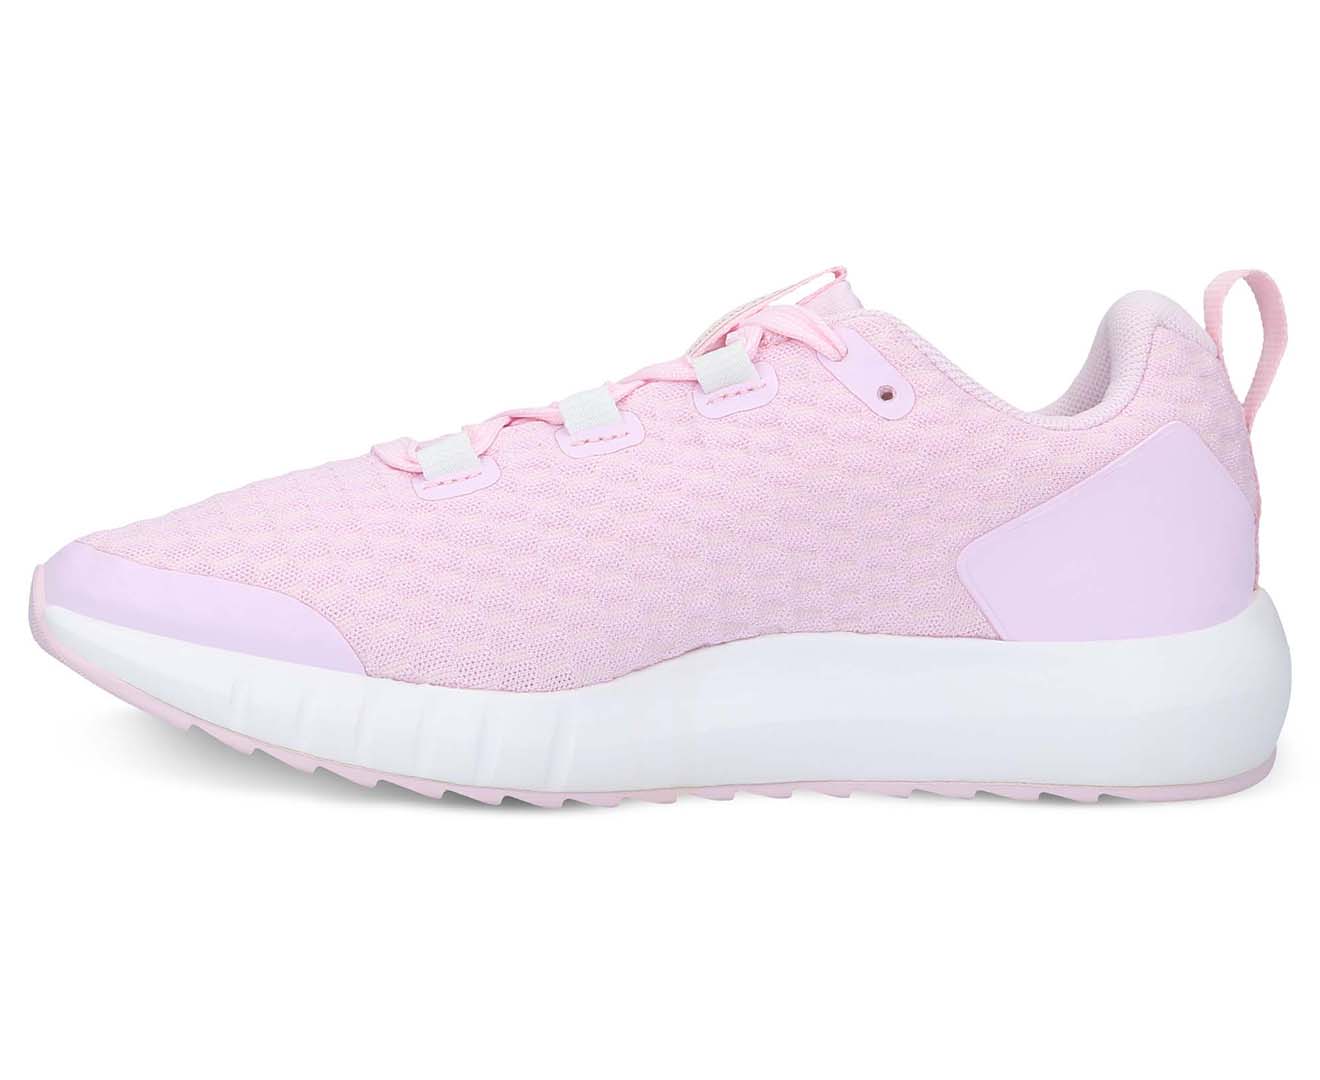 Under Armour Youth Suspend Shoes - Arctic Pink | Catch.co.nz